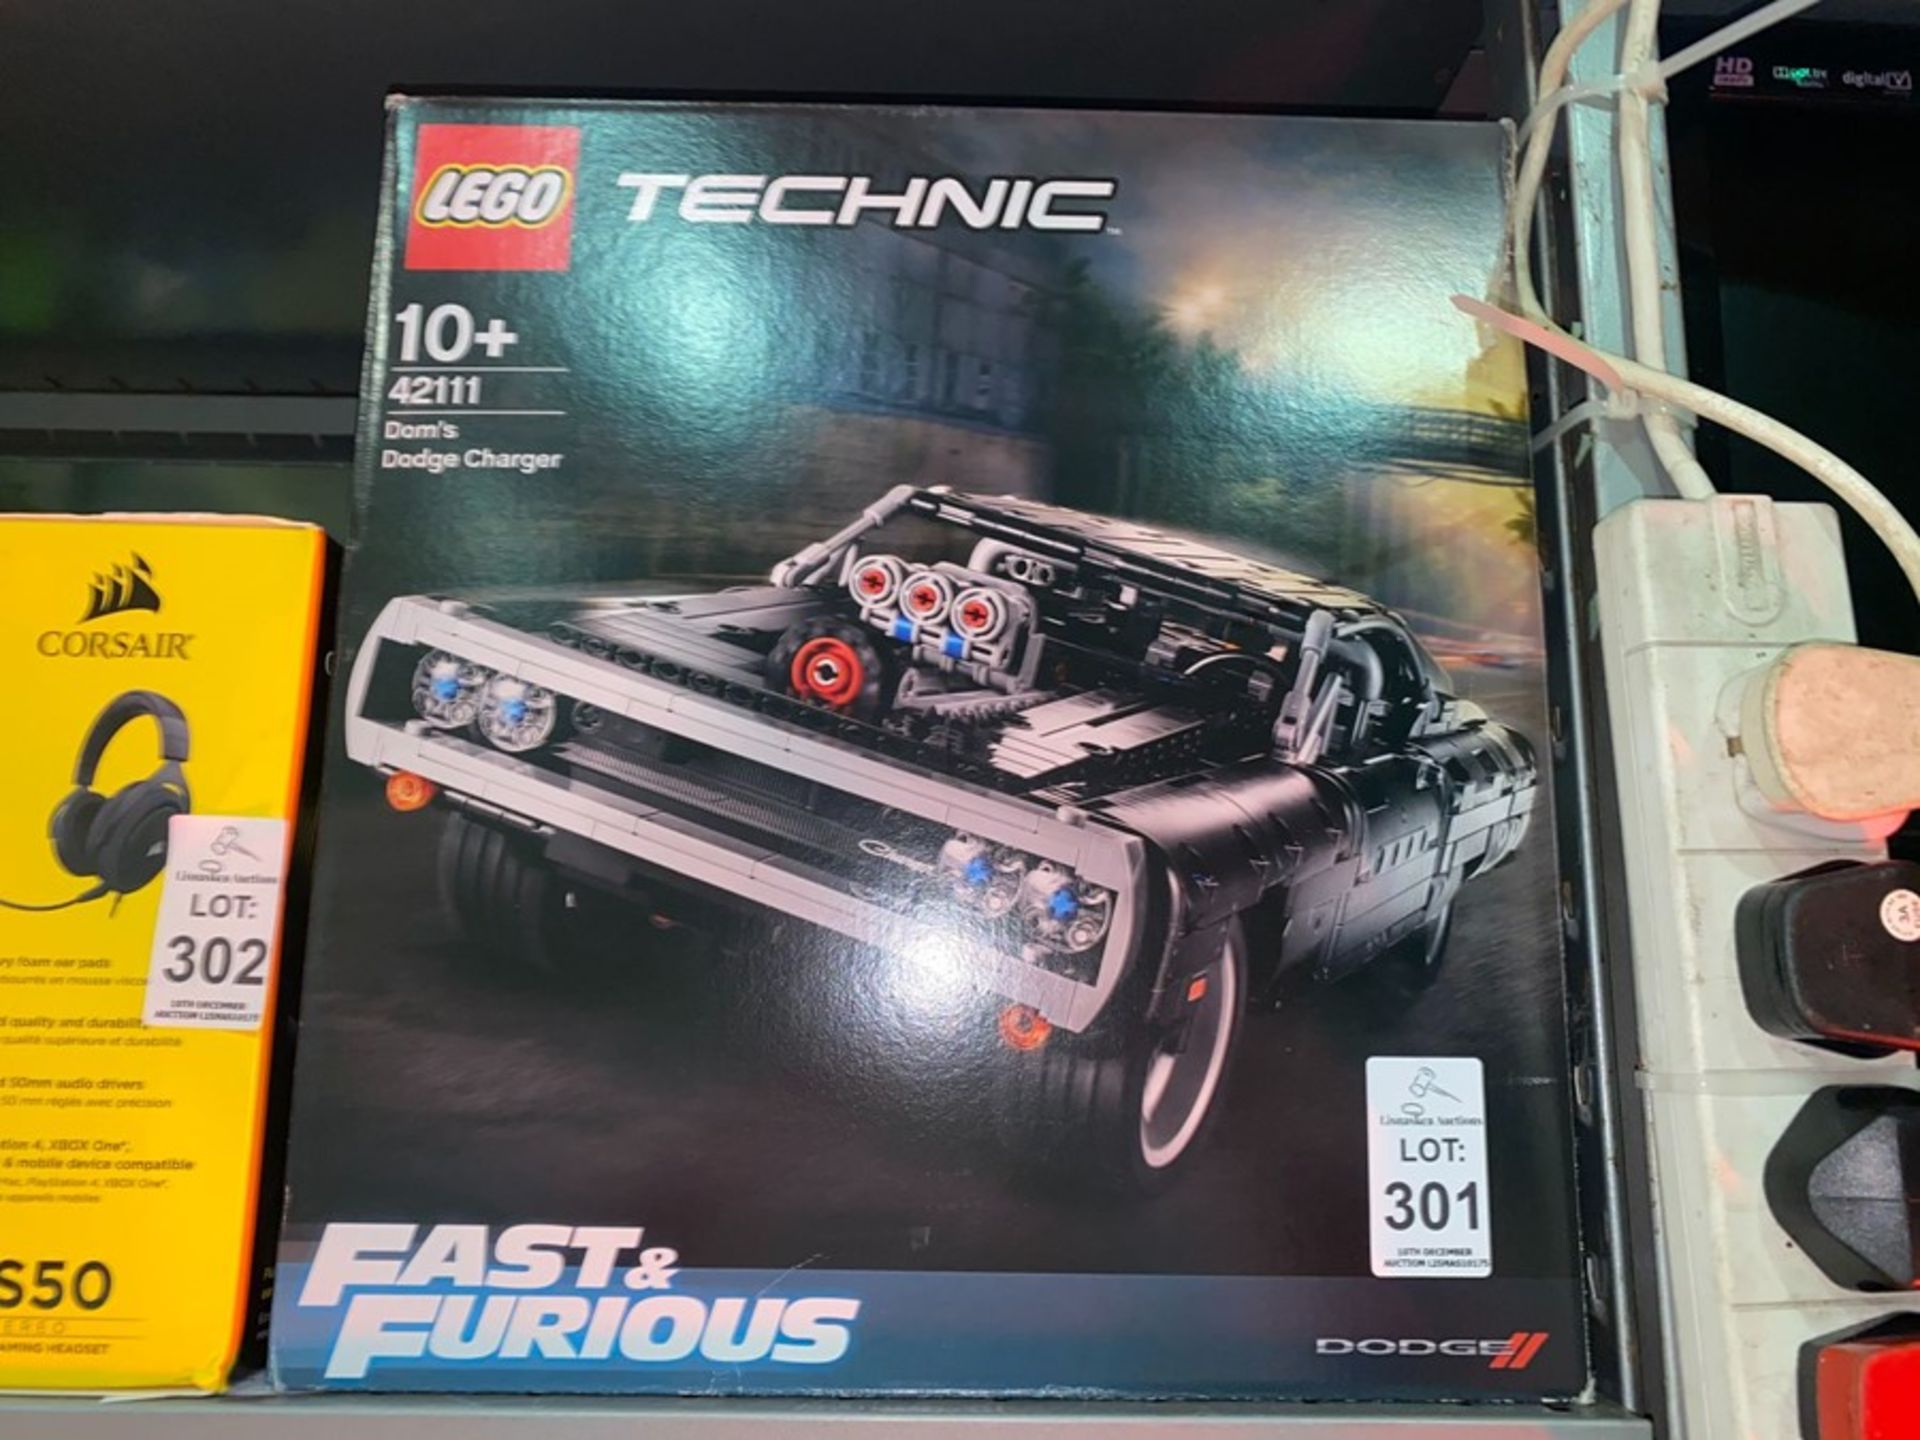 LEGO TECHNIC FAST & FURIOUS DOM'S DODGE CHARGER 42111